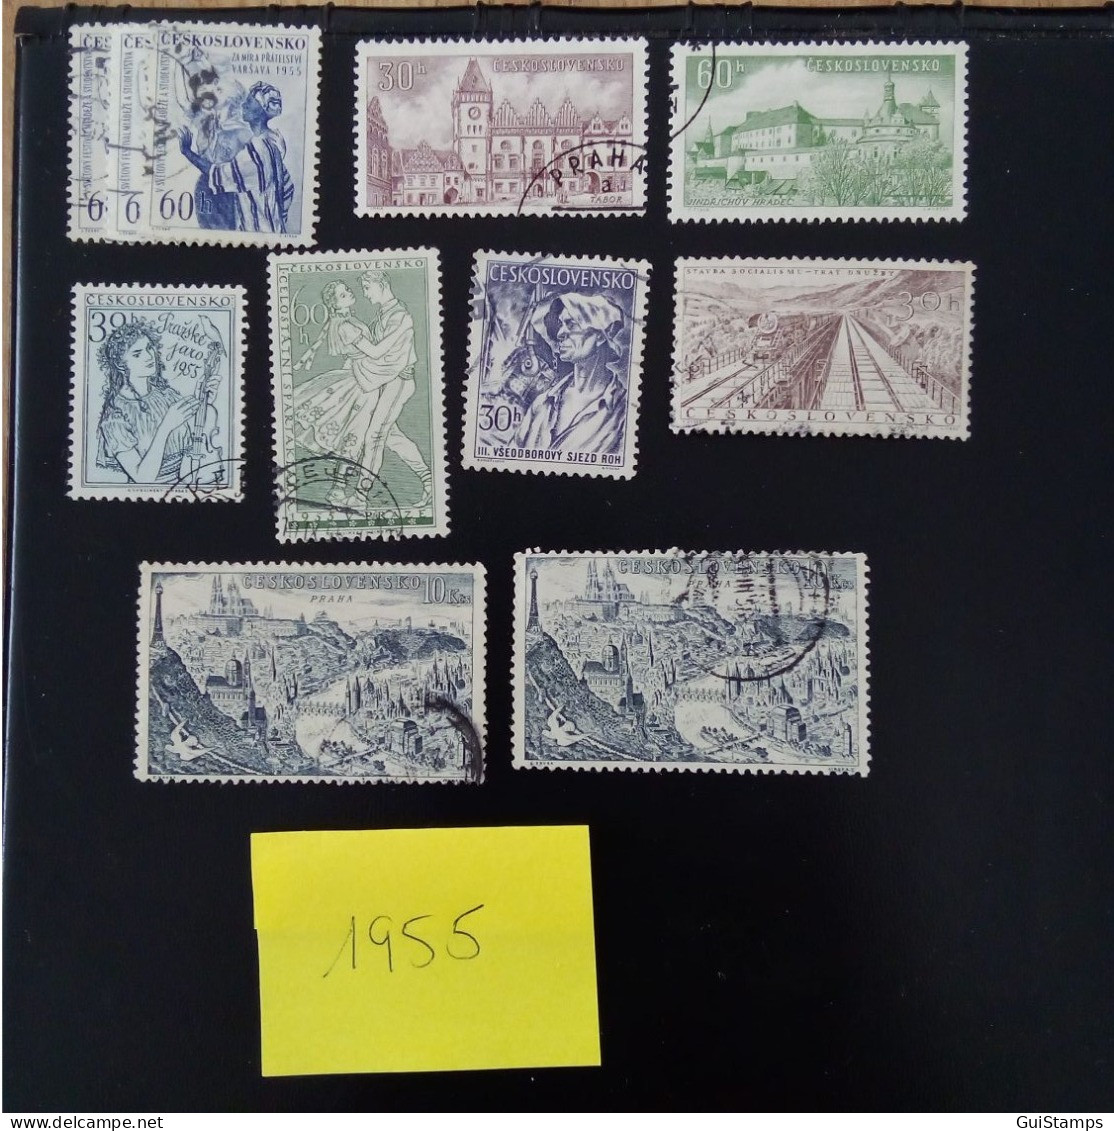 Stamps Czechoslovakia 1950 Do 1959 - Rare Selection Small Price - Gebraucht